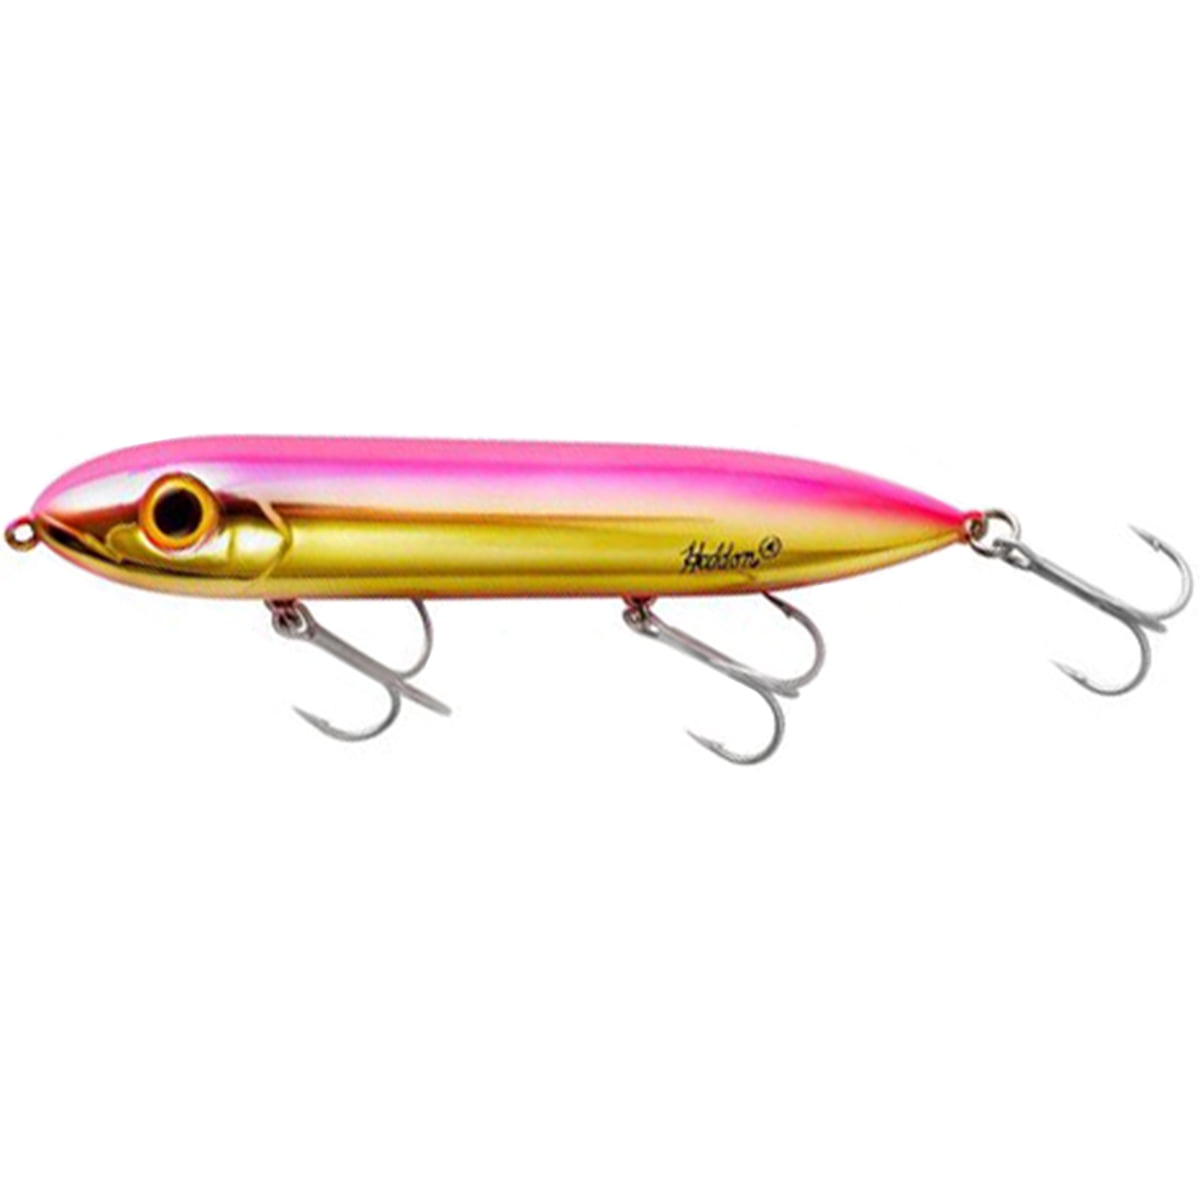 Heddon Super Sonic fishing lure made in USA red print (lot#12998)